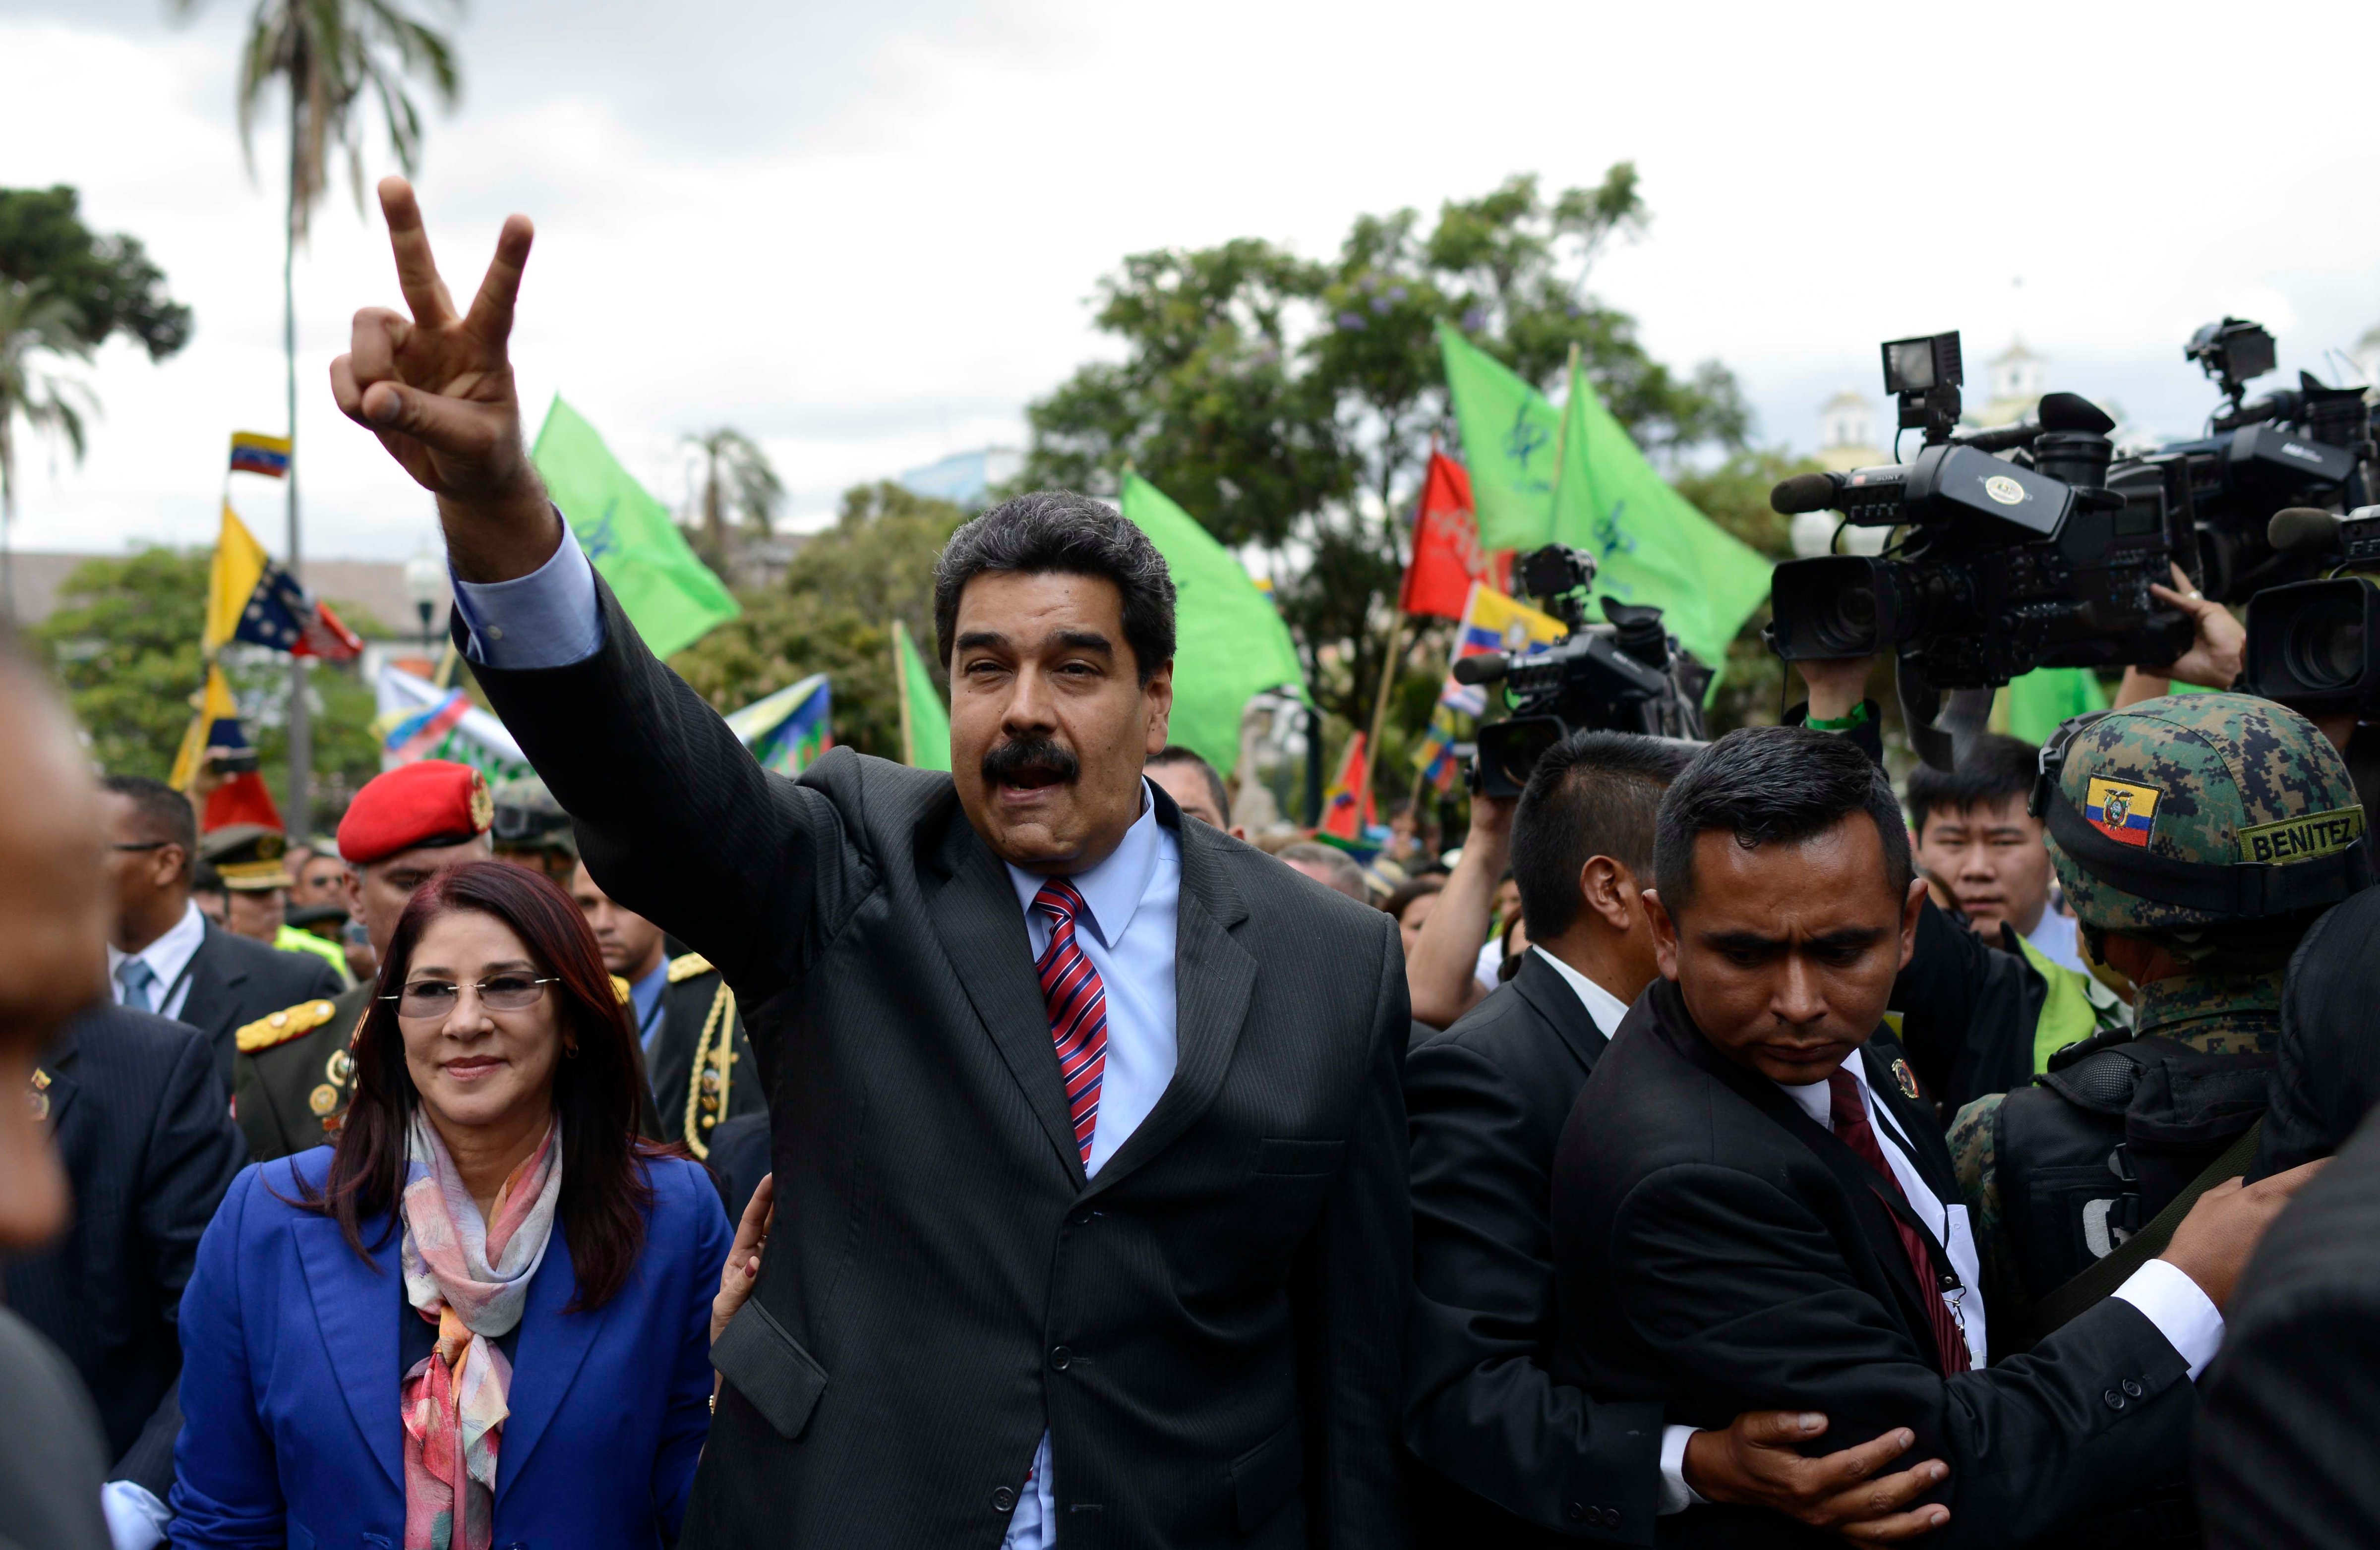 Venezuela's President Nicolas Maduro, accompanied by his first lady Cilia Flores, flashes a peace sign as he arrives at government palace, in Quito, Ecuador, Sept. 21, 2015.